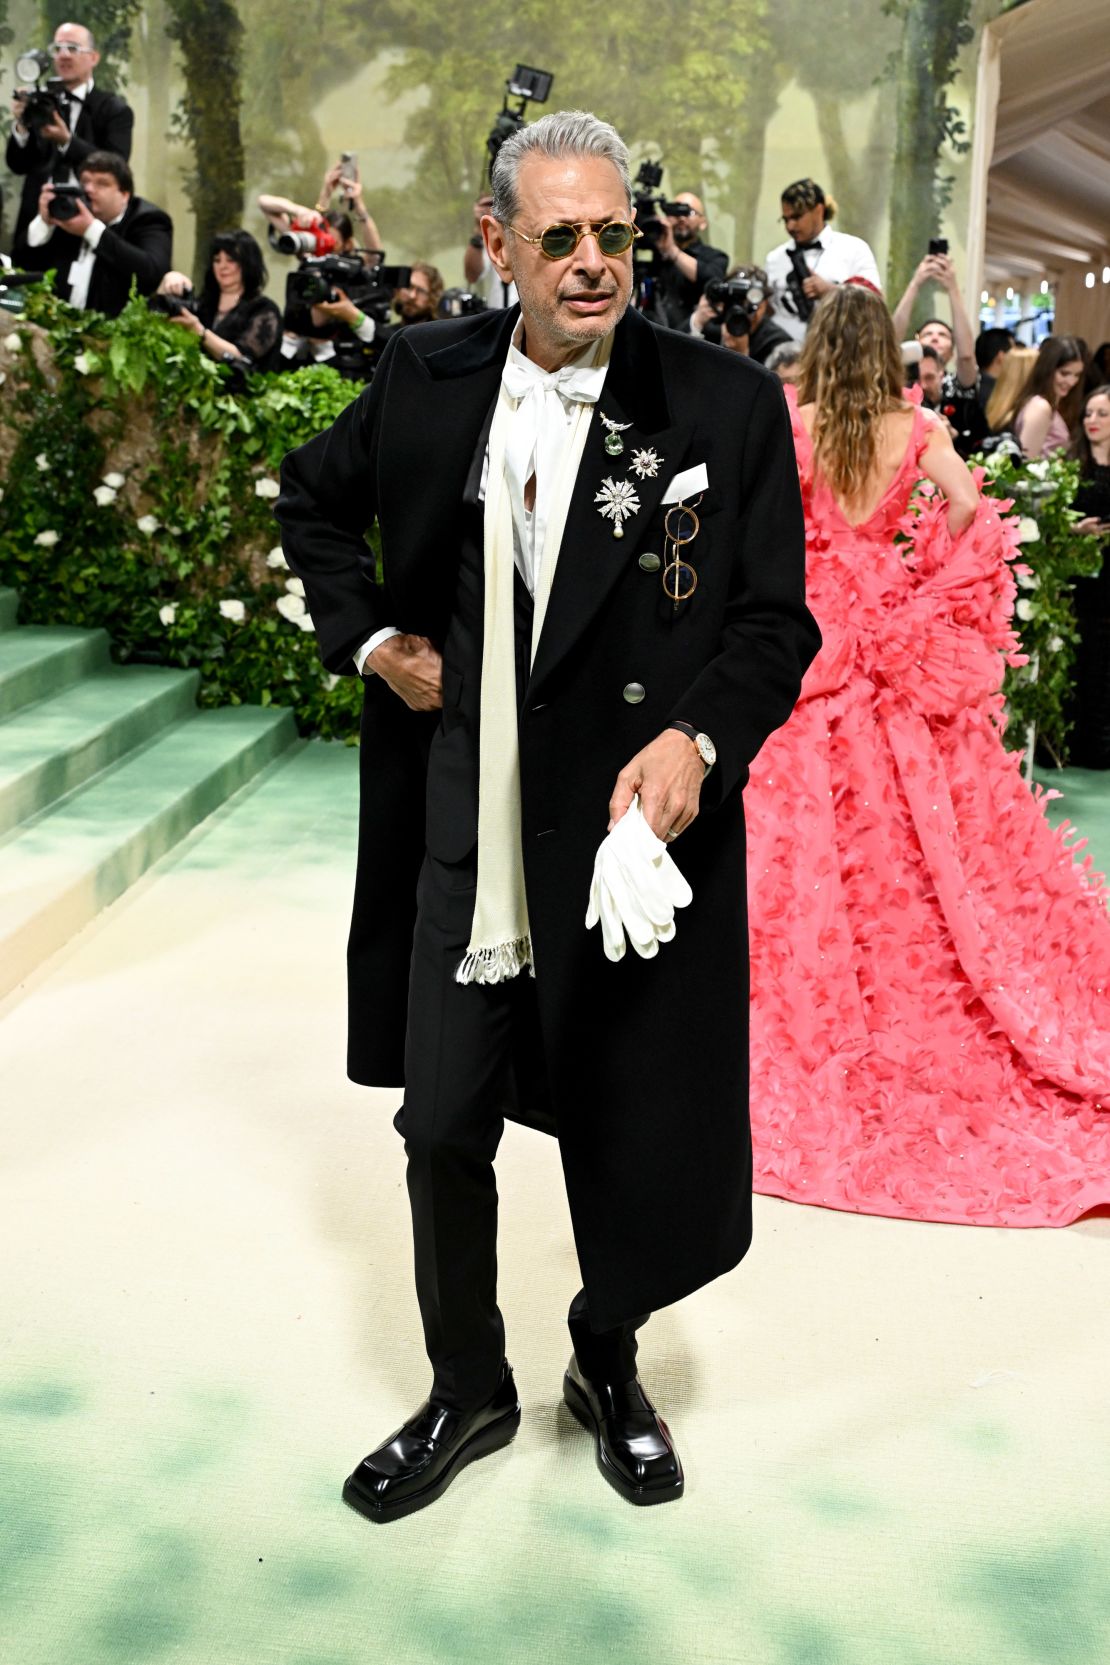 Jeff Goldblum also embodied Count Axel in a opulent outfit including a smattering of Tiffany's brooches.